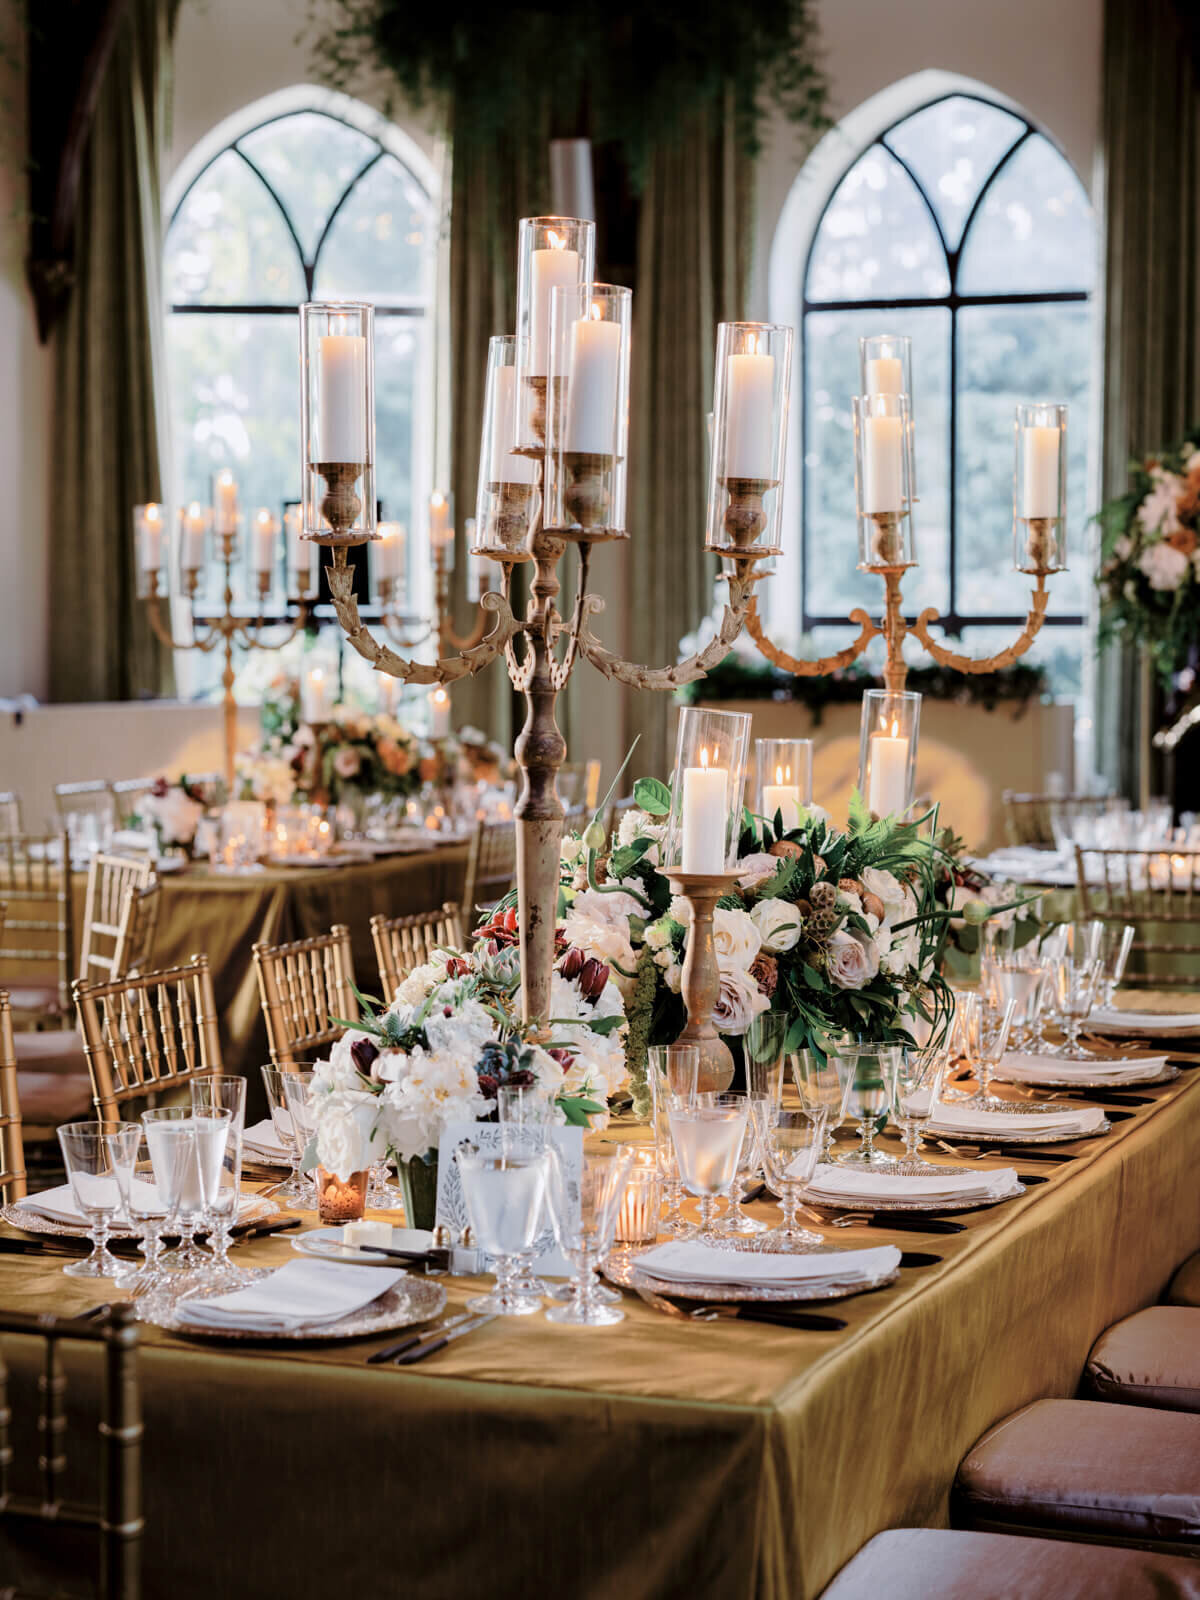 Two long, bronze dining tables and chairs, with large flower bouquet and candle centerpieces, plates and cutleries